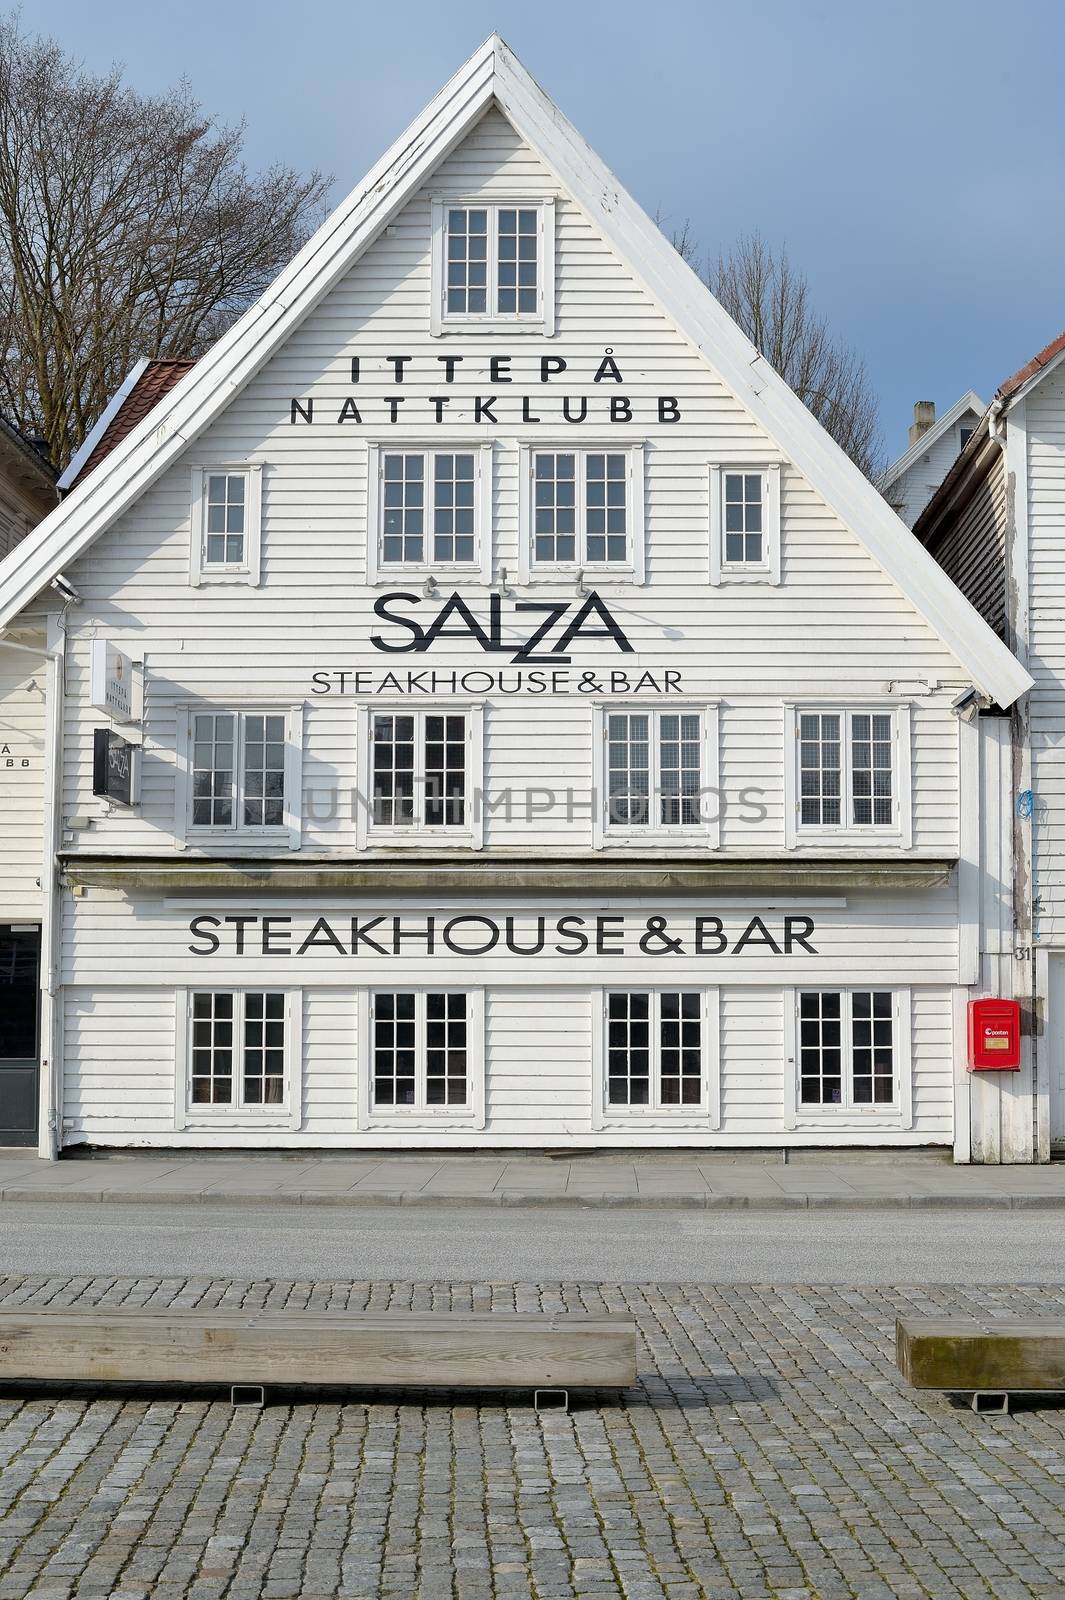 Salza Steakhouse and Bar Strandkaien Stavanger Norway by Whiteboxmedia